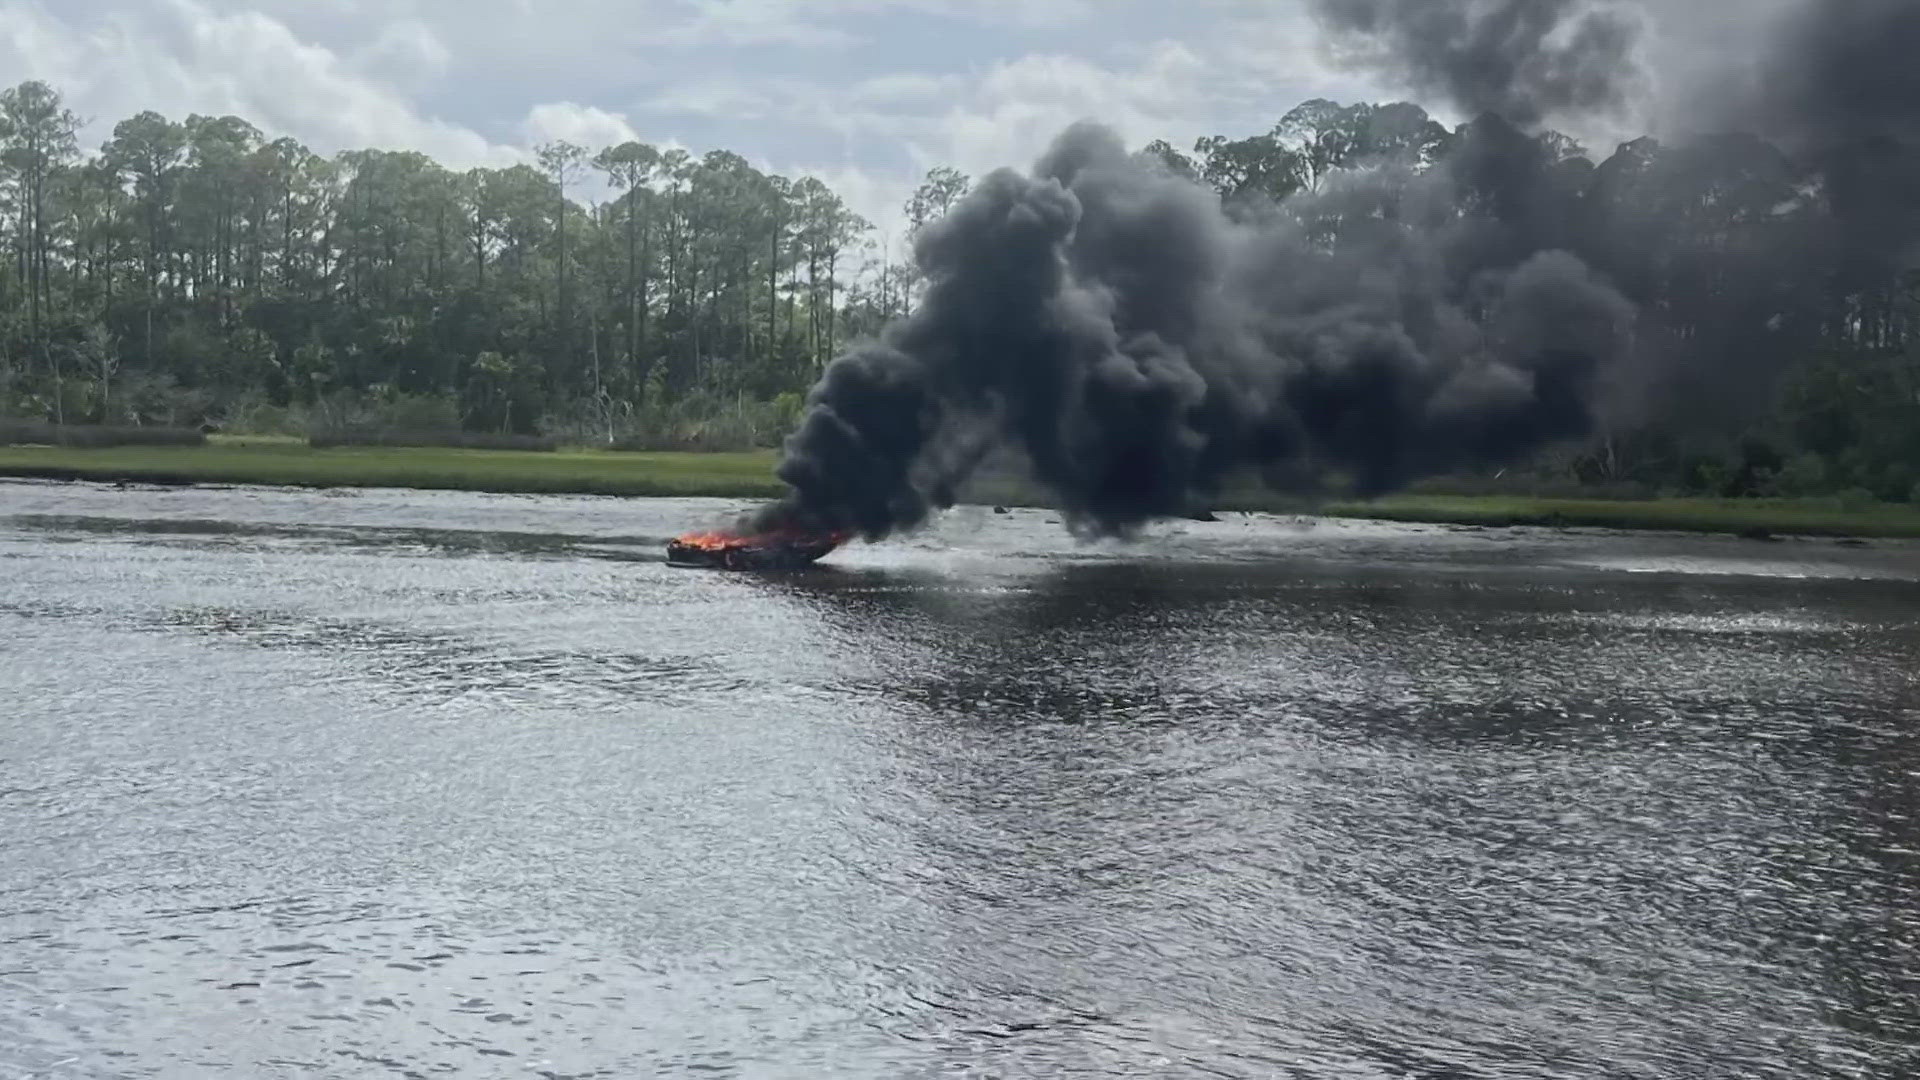 Fire rescue crews put out a "fully-involved" boat fire in St. Johns County Thursday.